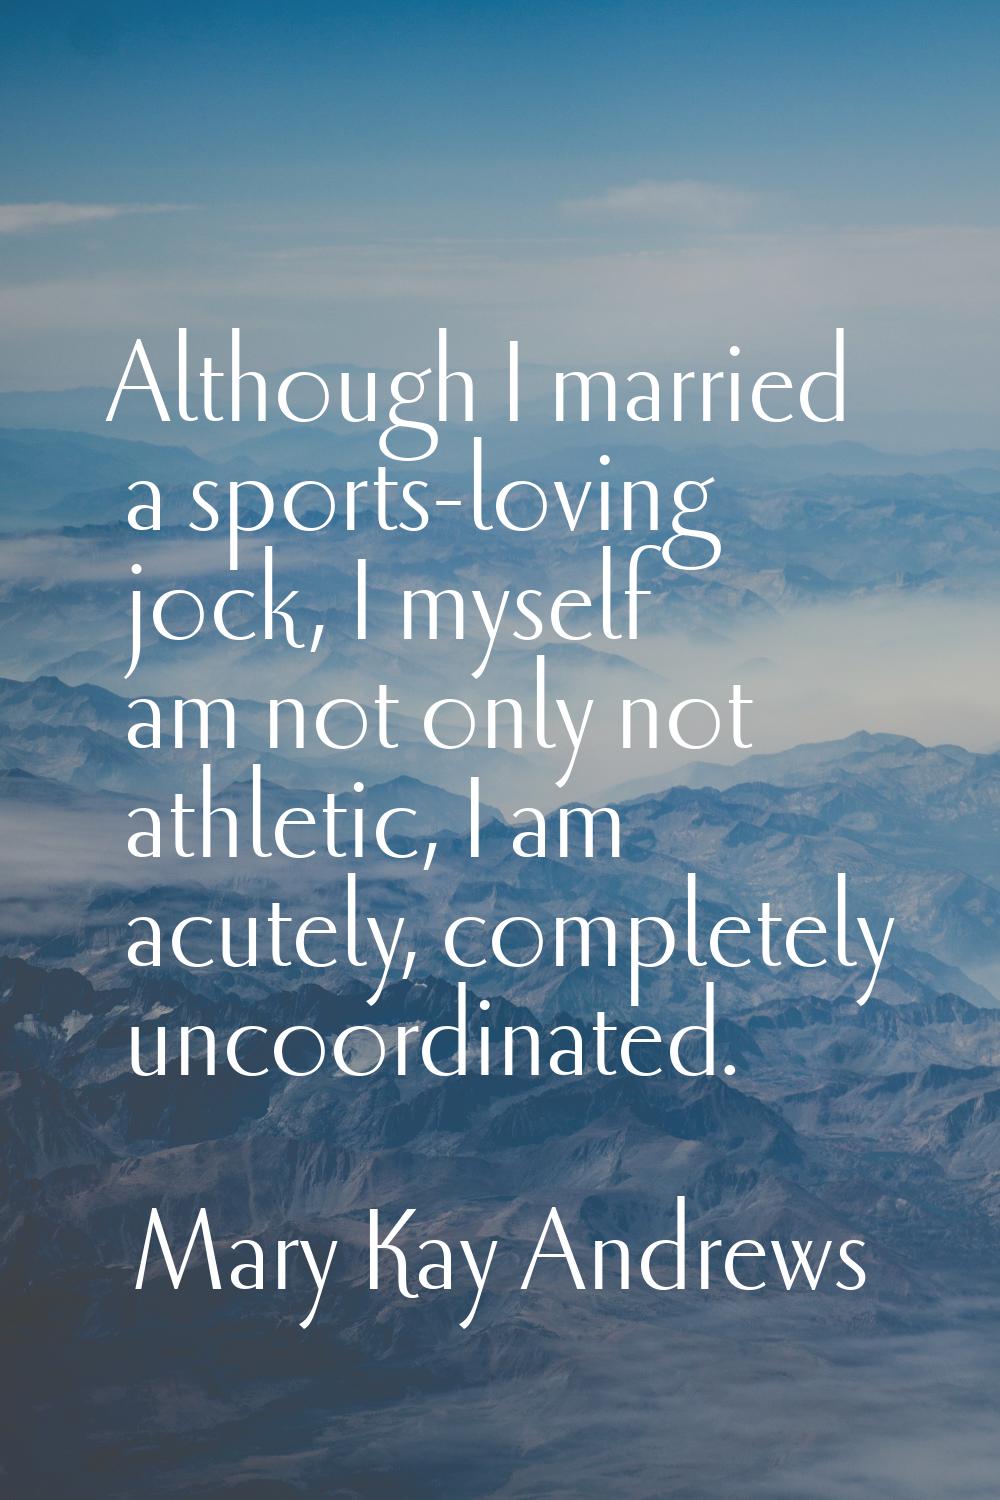 Although I married a sports-loving jock, I myself am not only not athletic, I am acutely, completel